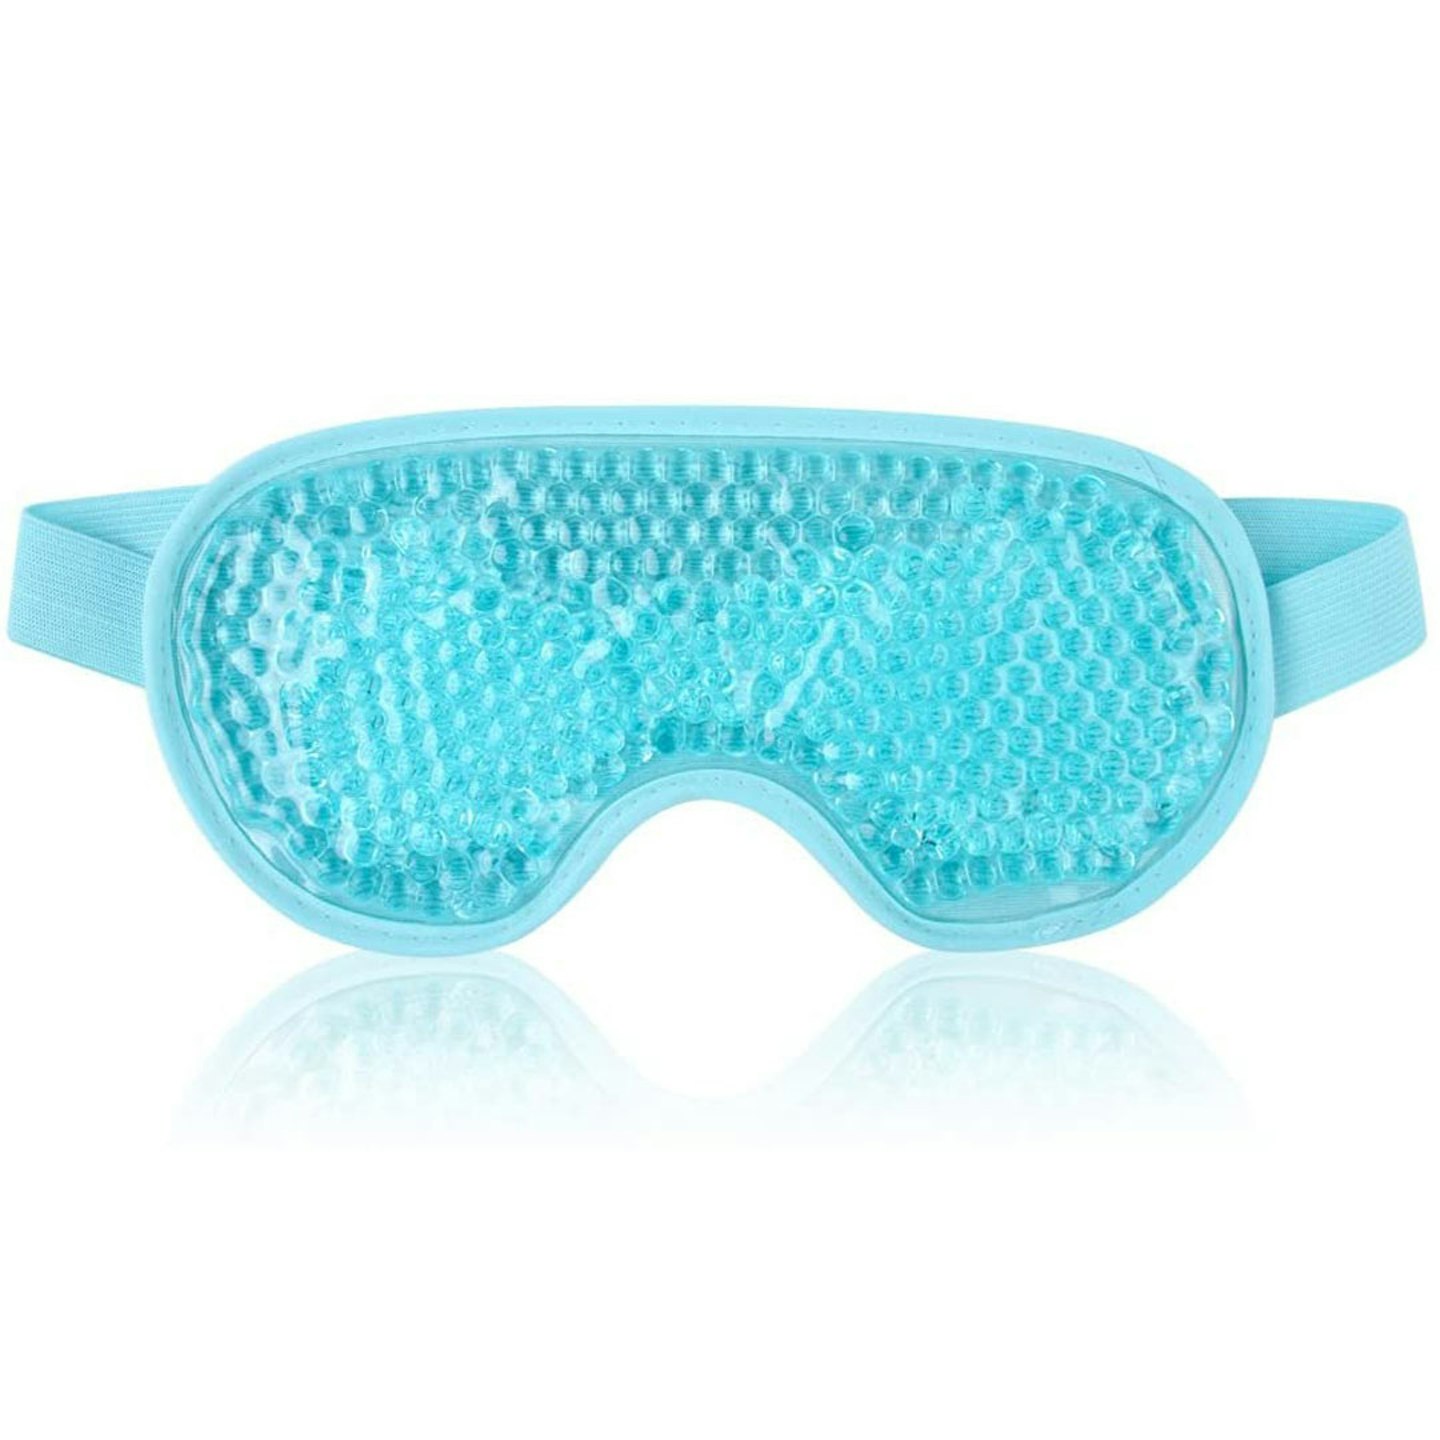 Best sleep mask: Eye Mask Cooling Reusable Hot Cold Therapy Gel